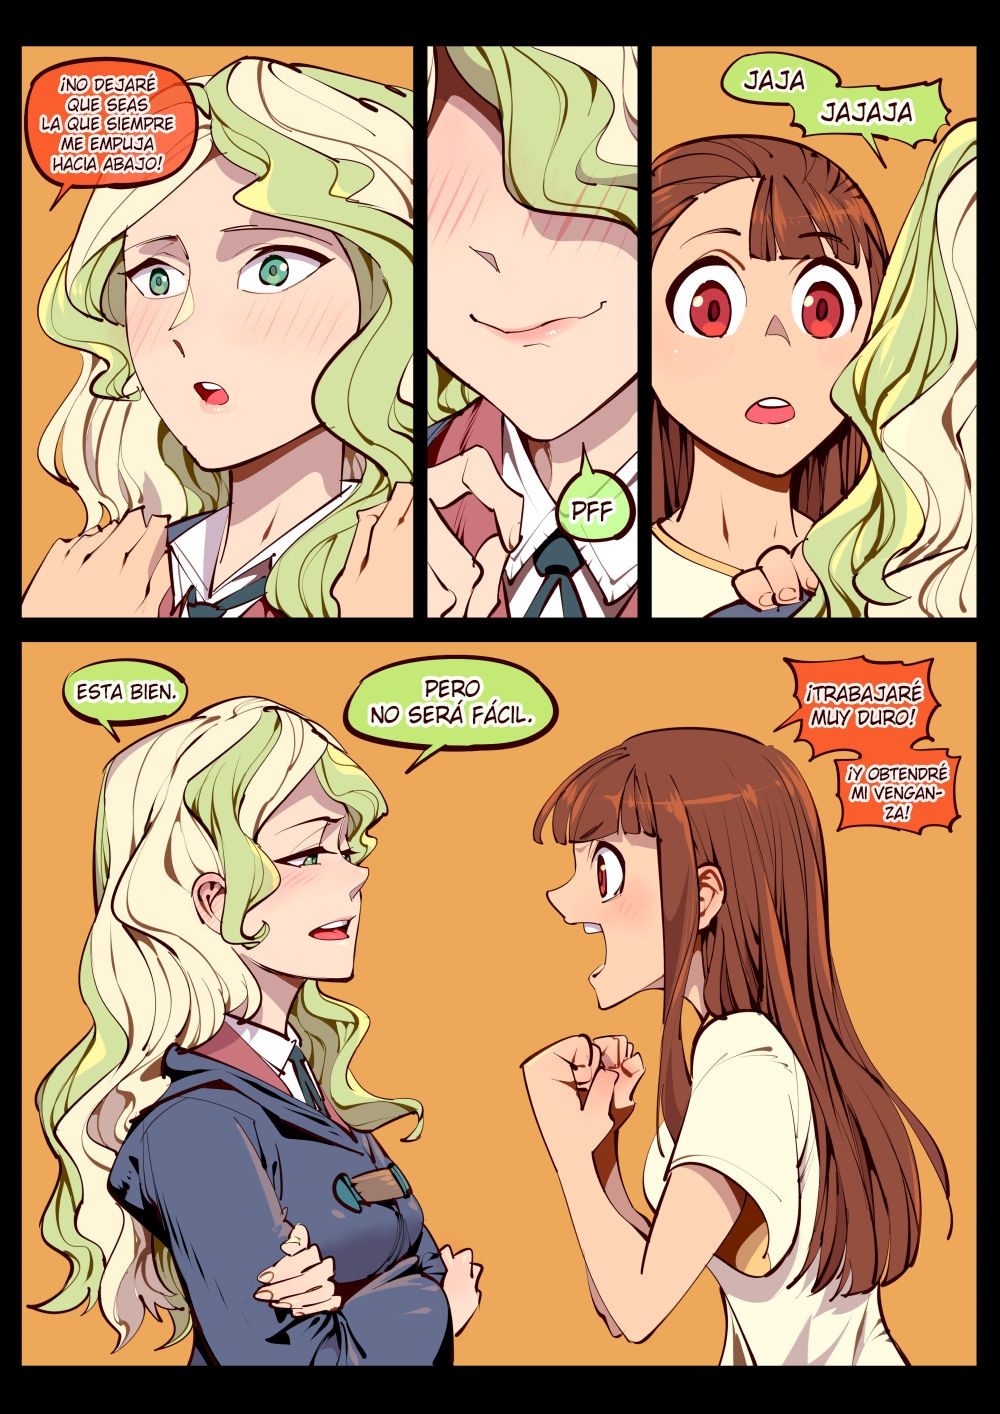 [Breakrabbit] Little Witch no Koi | Little witch love (Little Witch Academia) [Spanish] 21